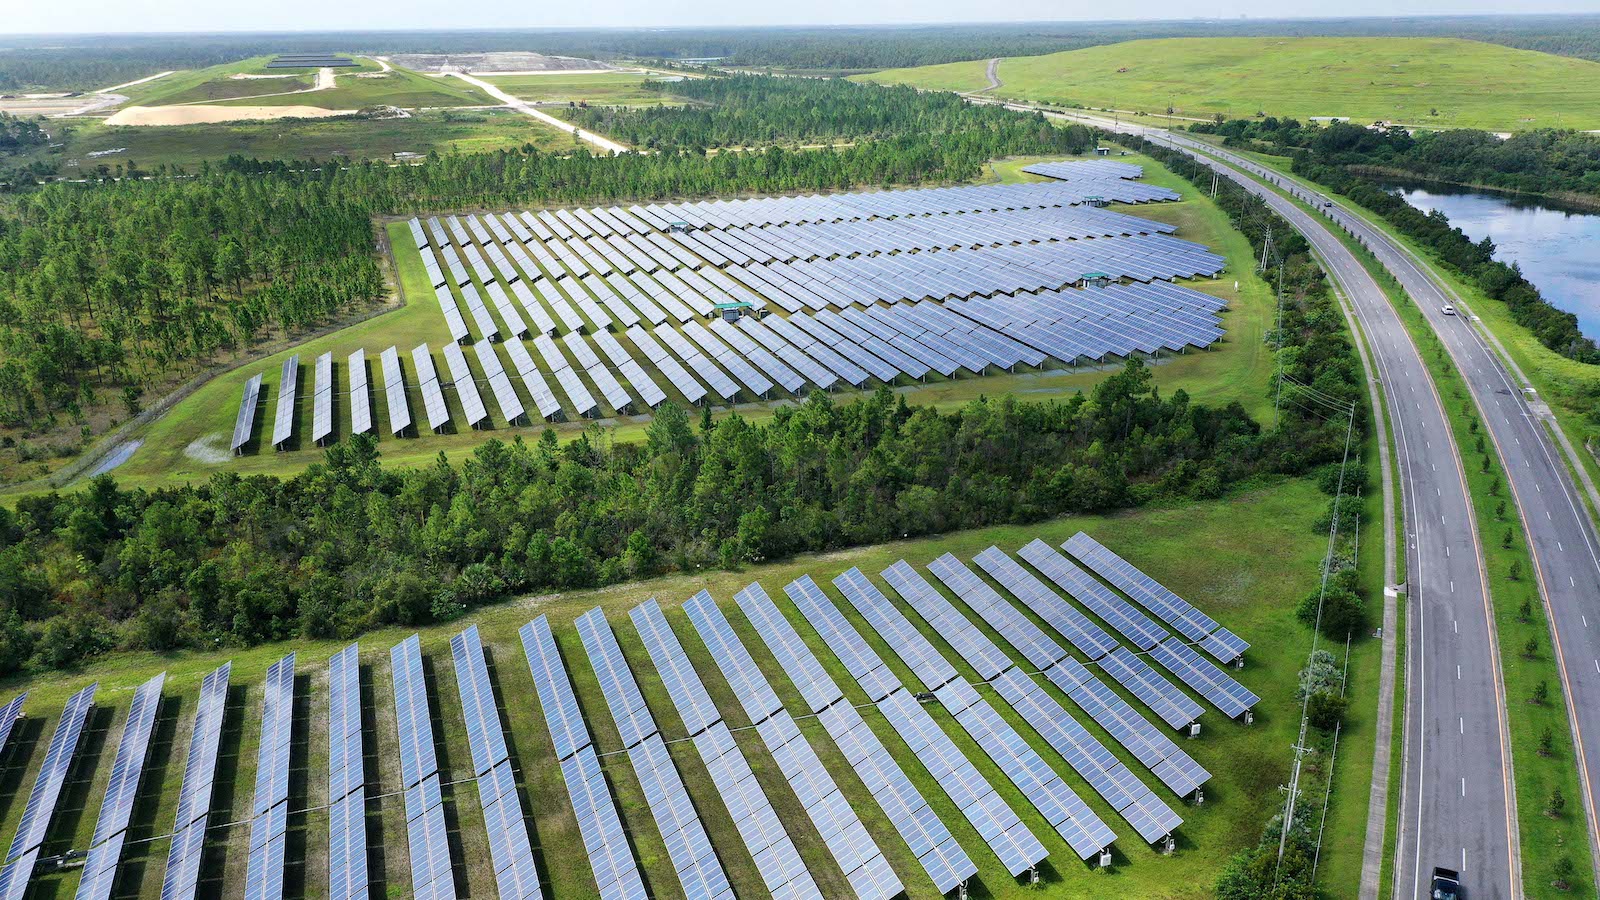 A solar farm spreads out next to a highway and river in this drone footage.